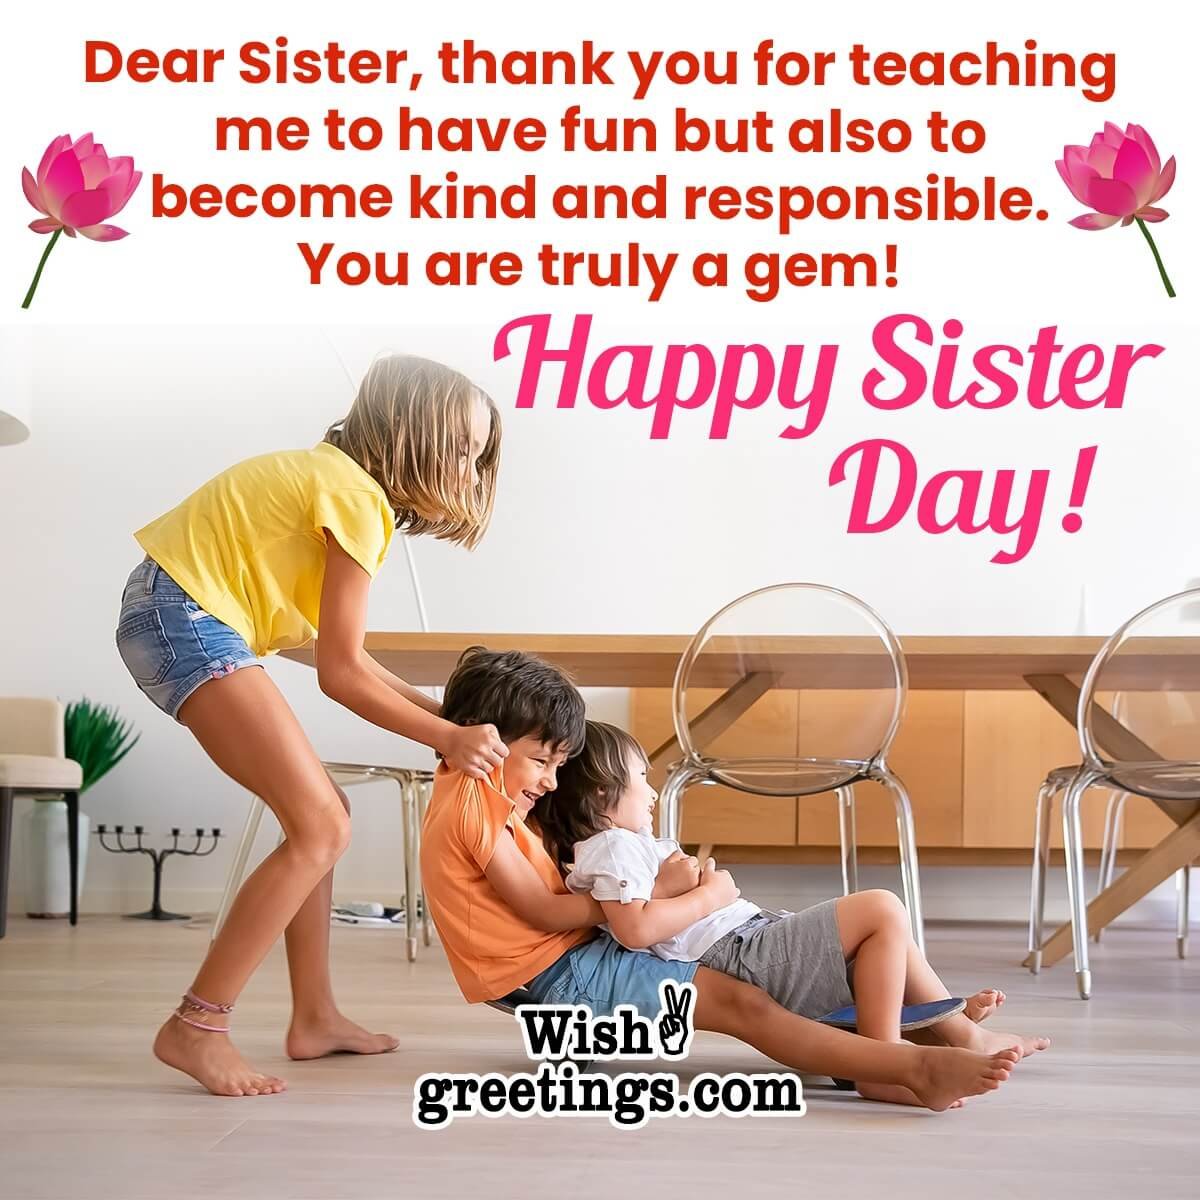 Happy Sisters Day Wish Image